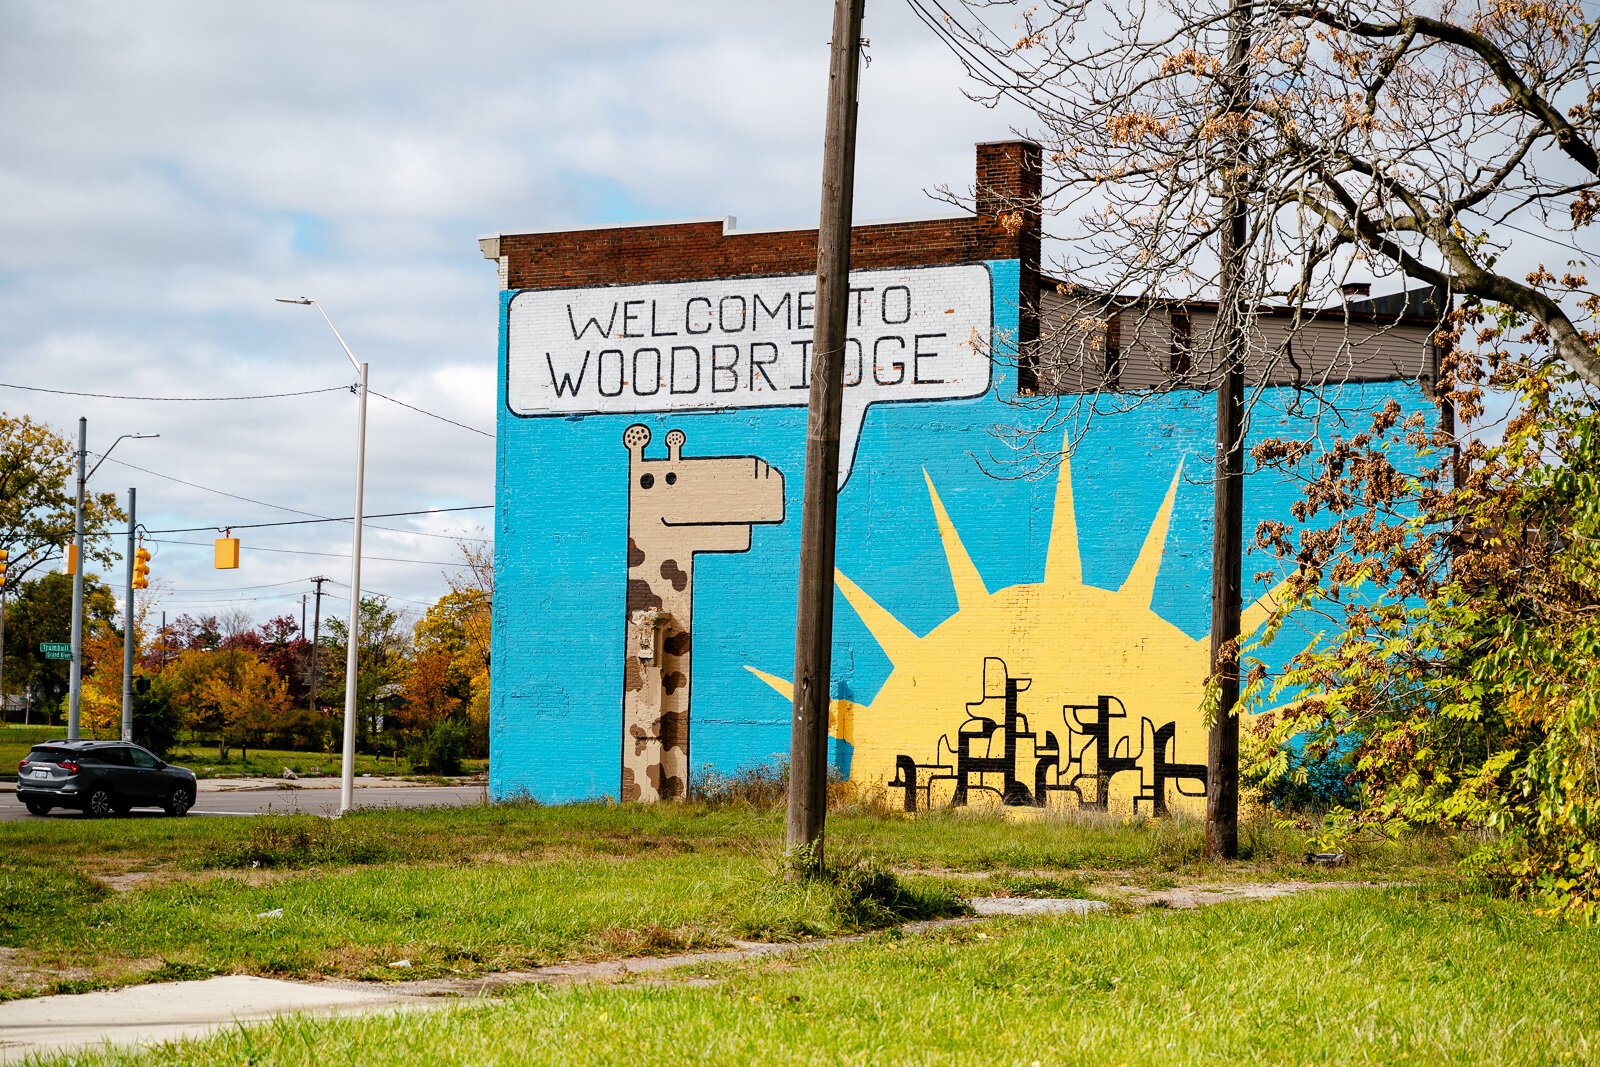 A colorful mural by Carl Oxley III welcomes people into Woodbridge.